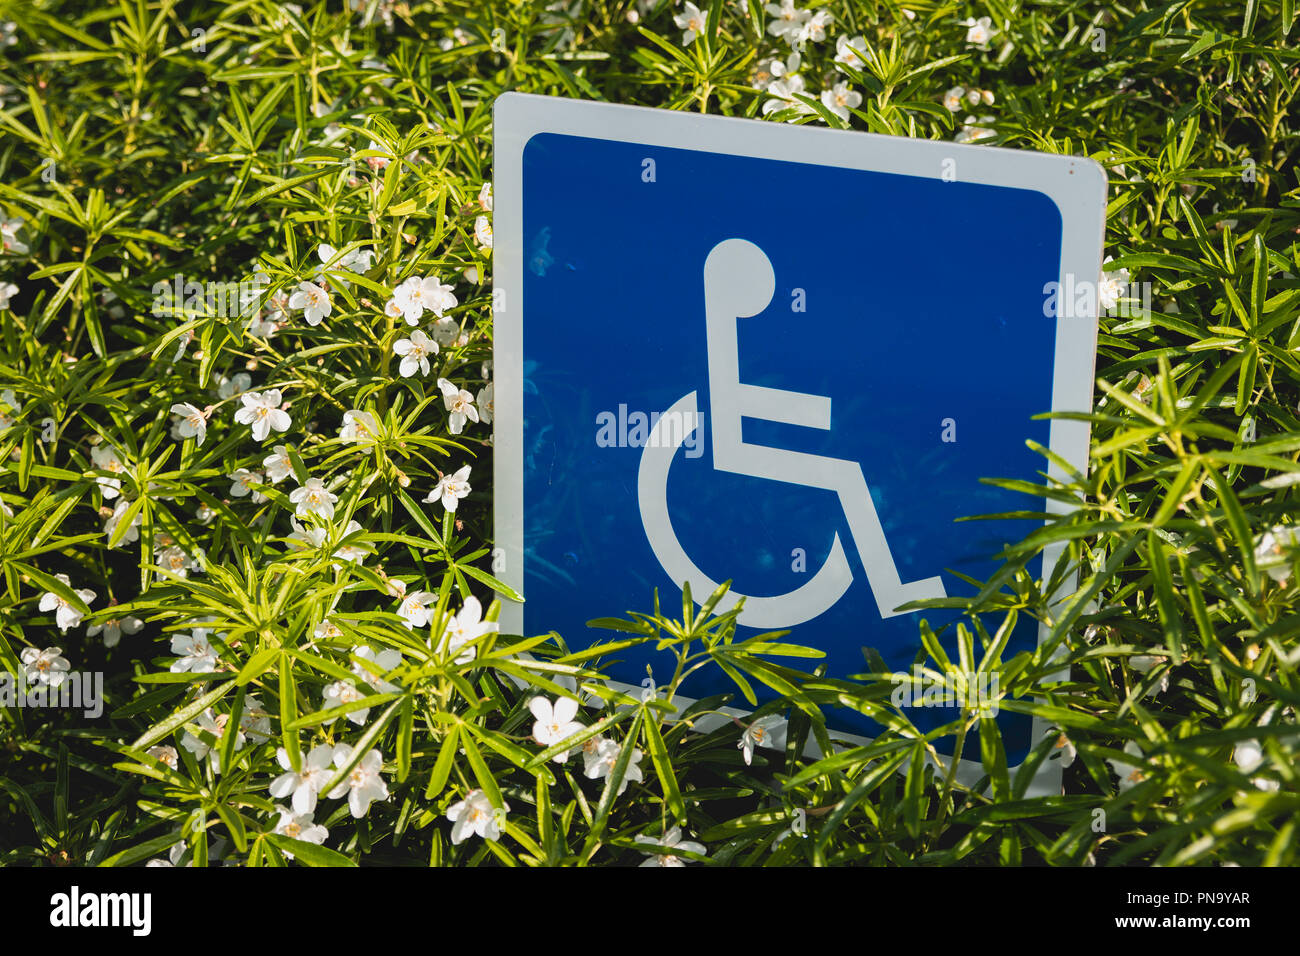 UK Disabled parking space sign in a hedge with flowers Stock Photo